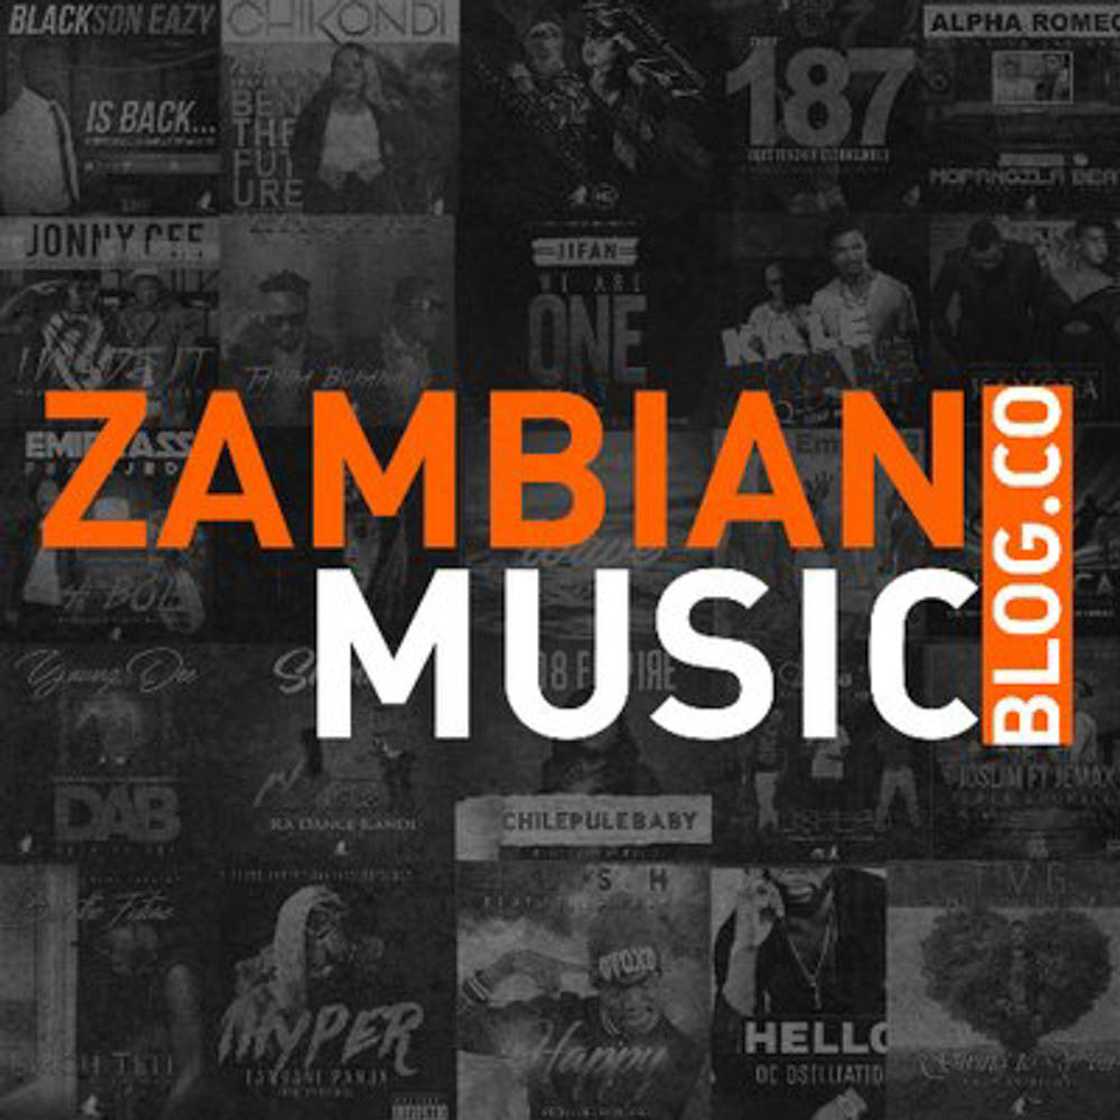 African music download